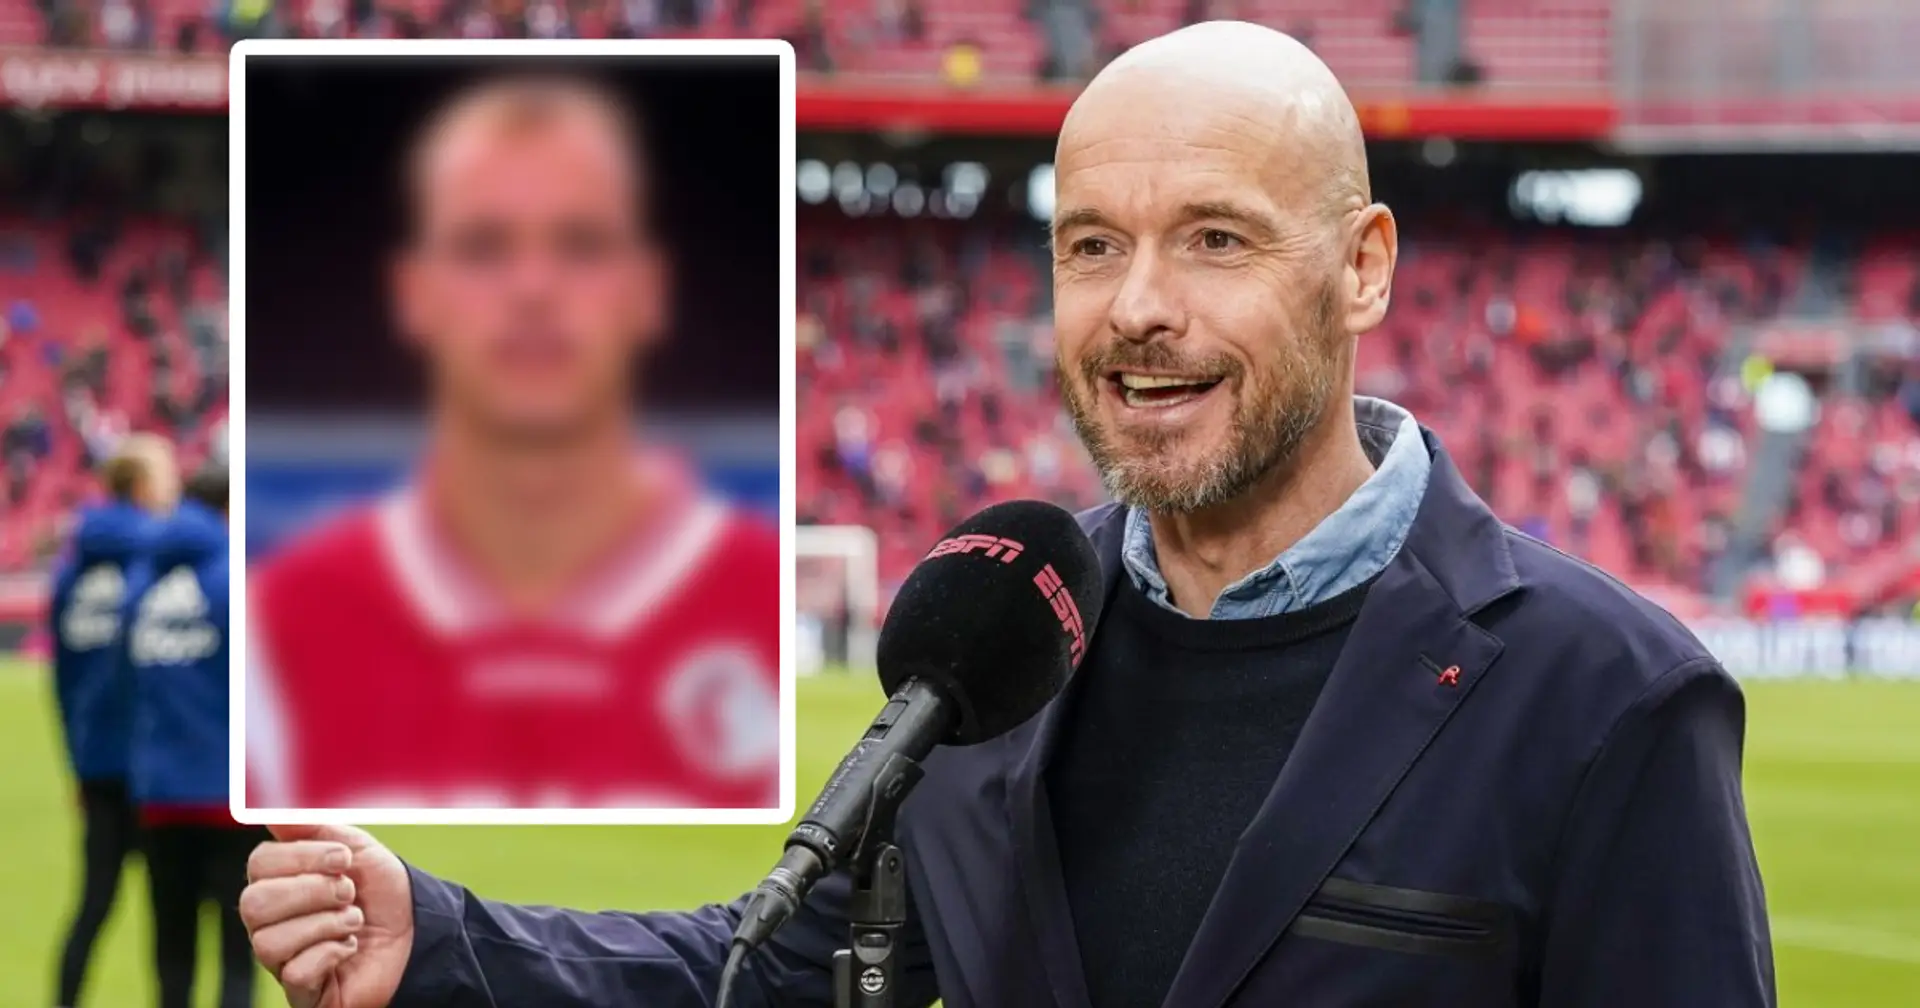 Blast from the past: What Erik ten Hag looked like with a head full of hair